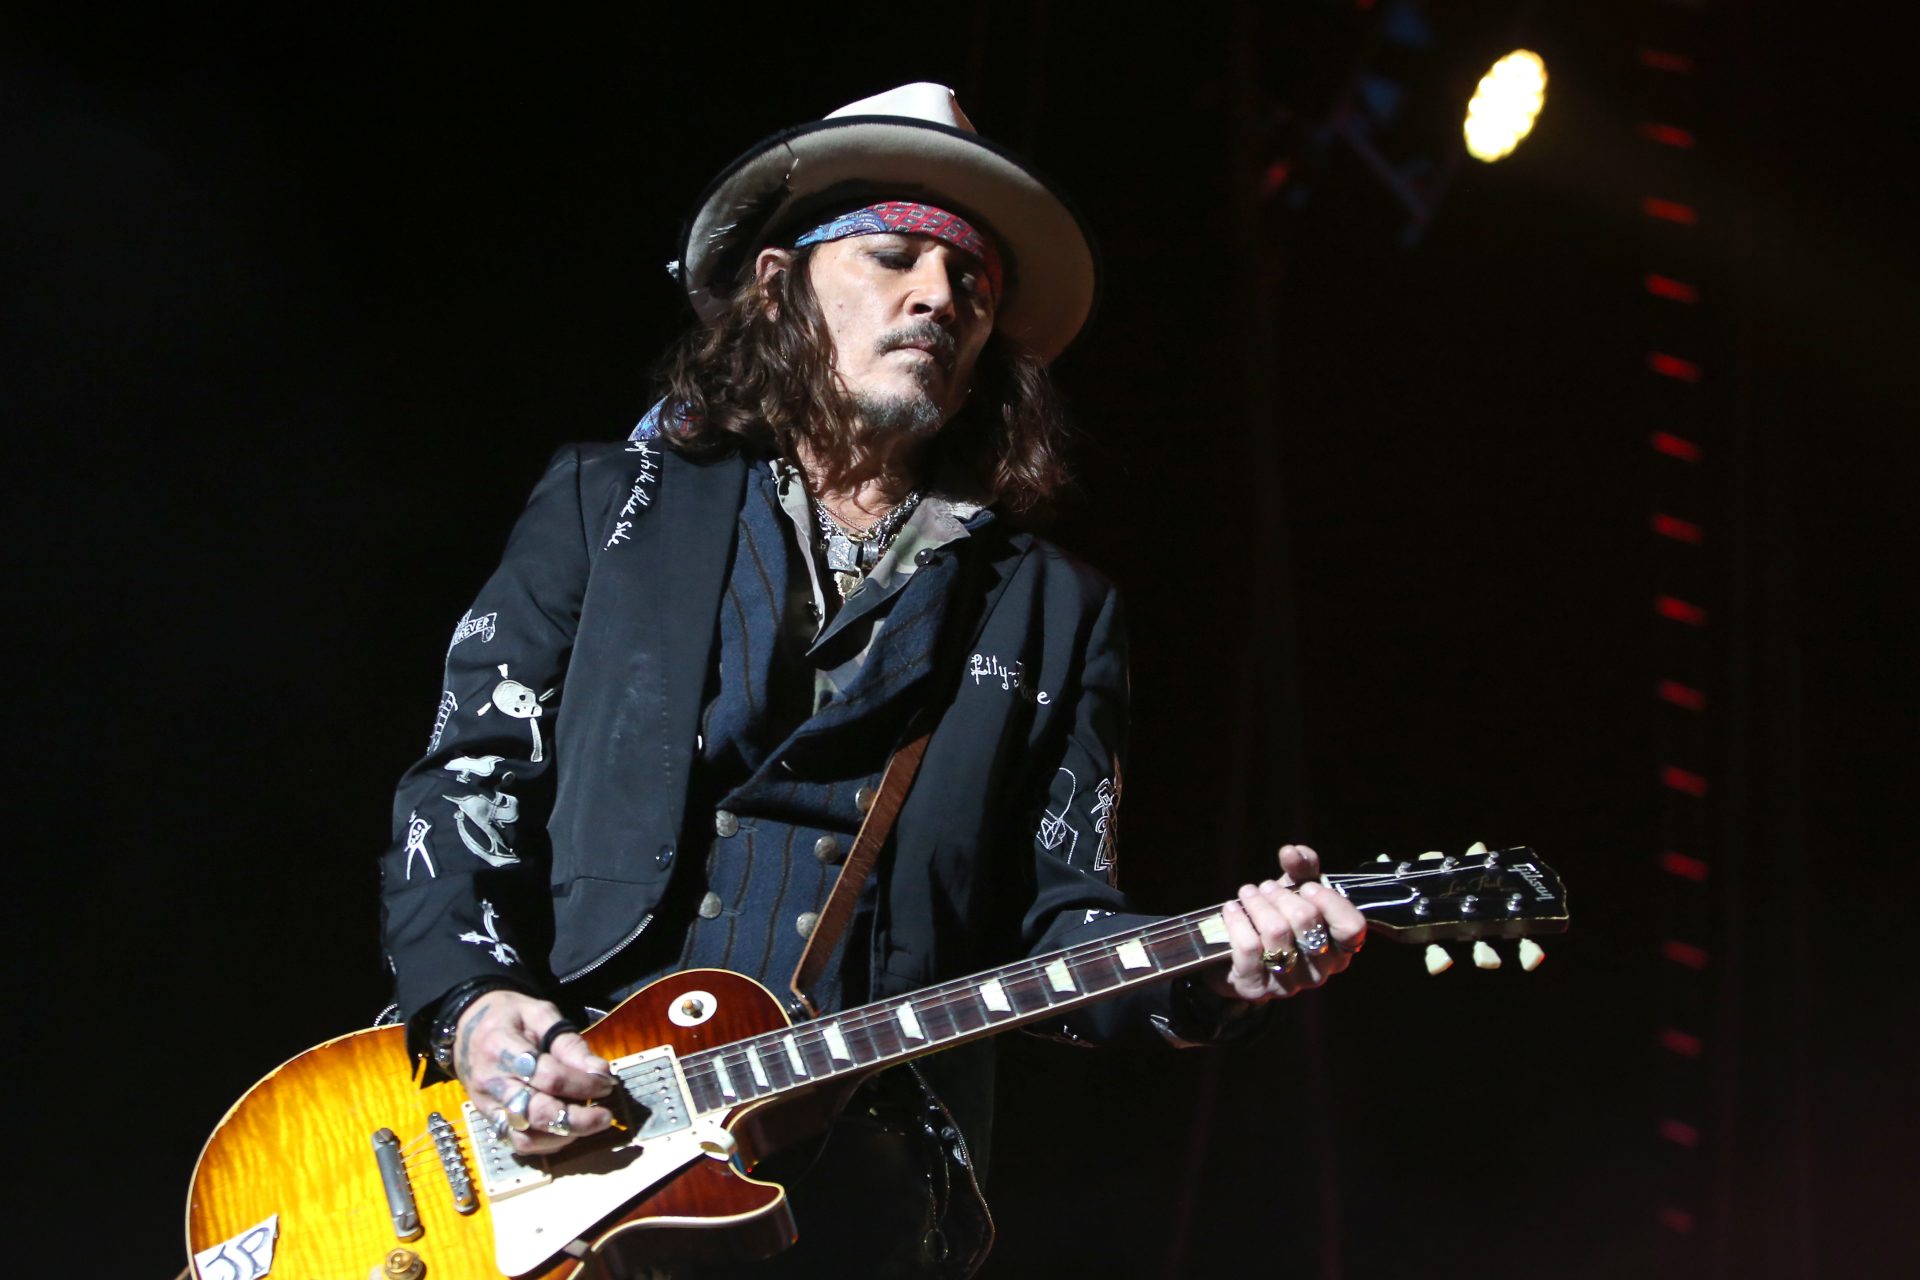 Johnny Depp's health problems while touring with his band